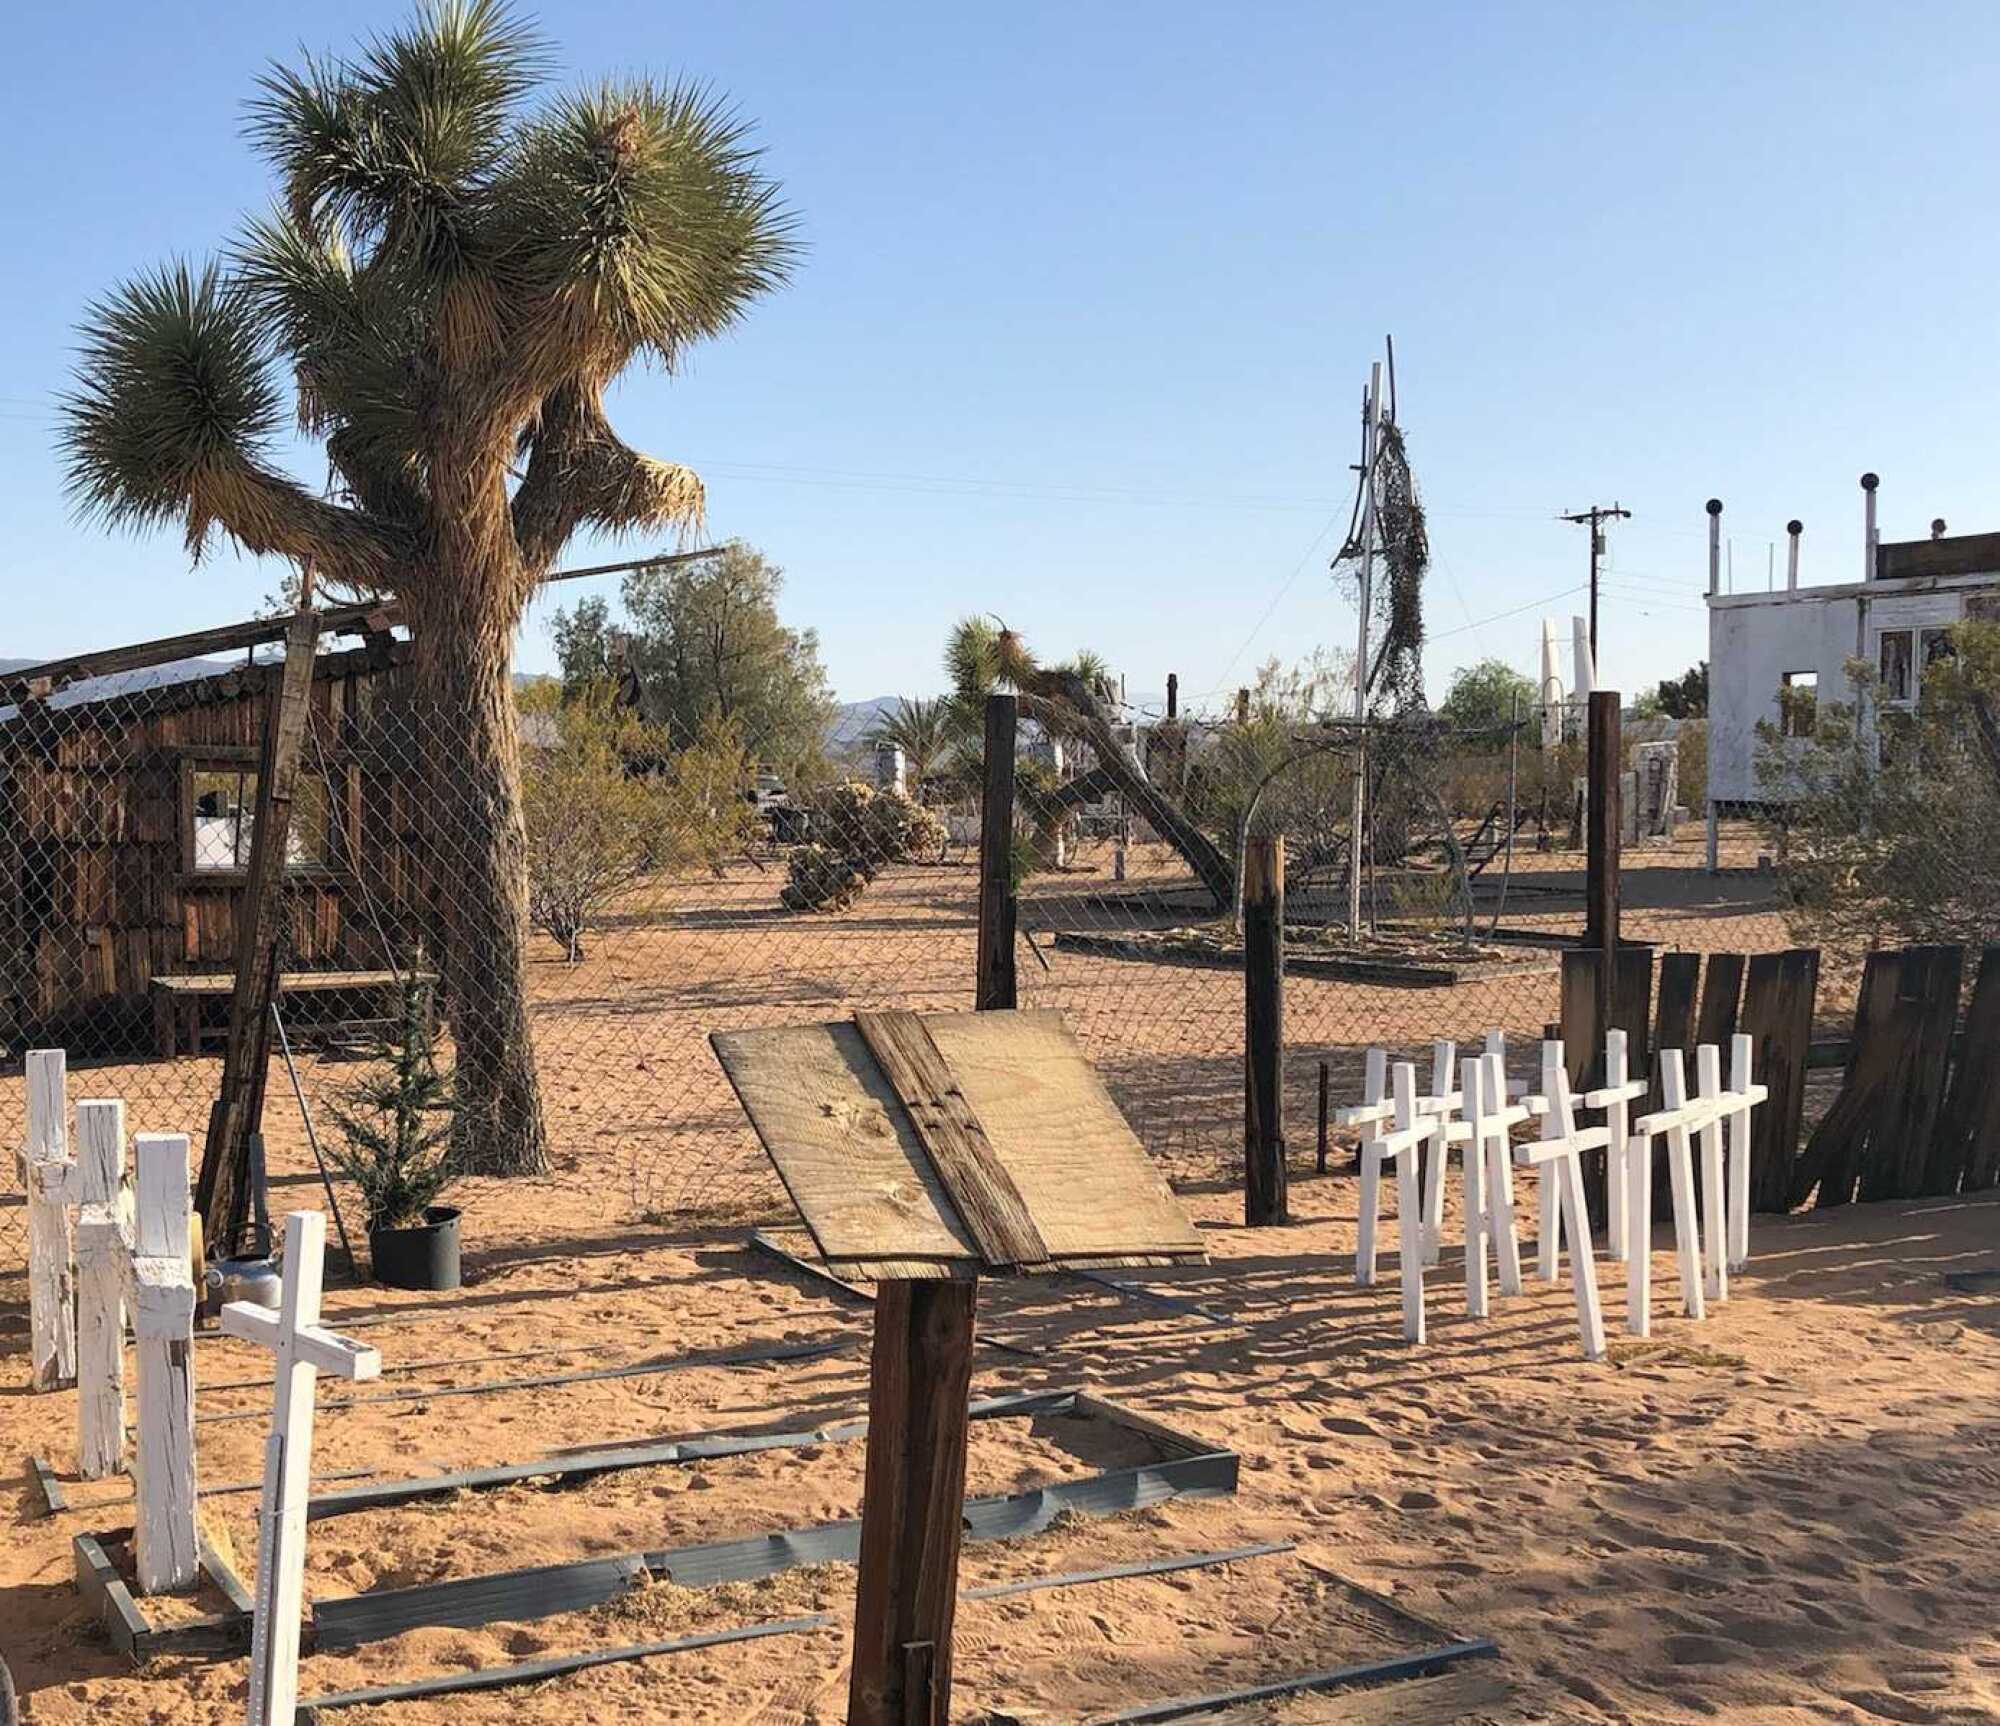 White crosses and other art installations in the desert